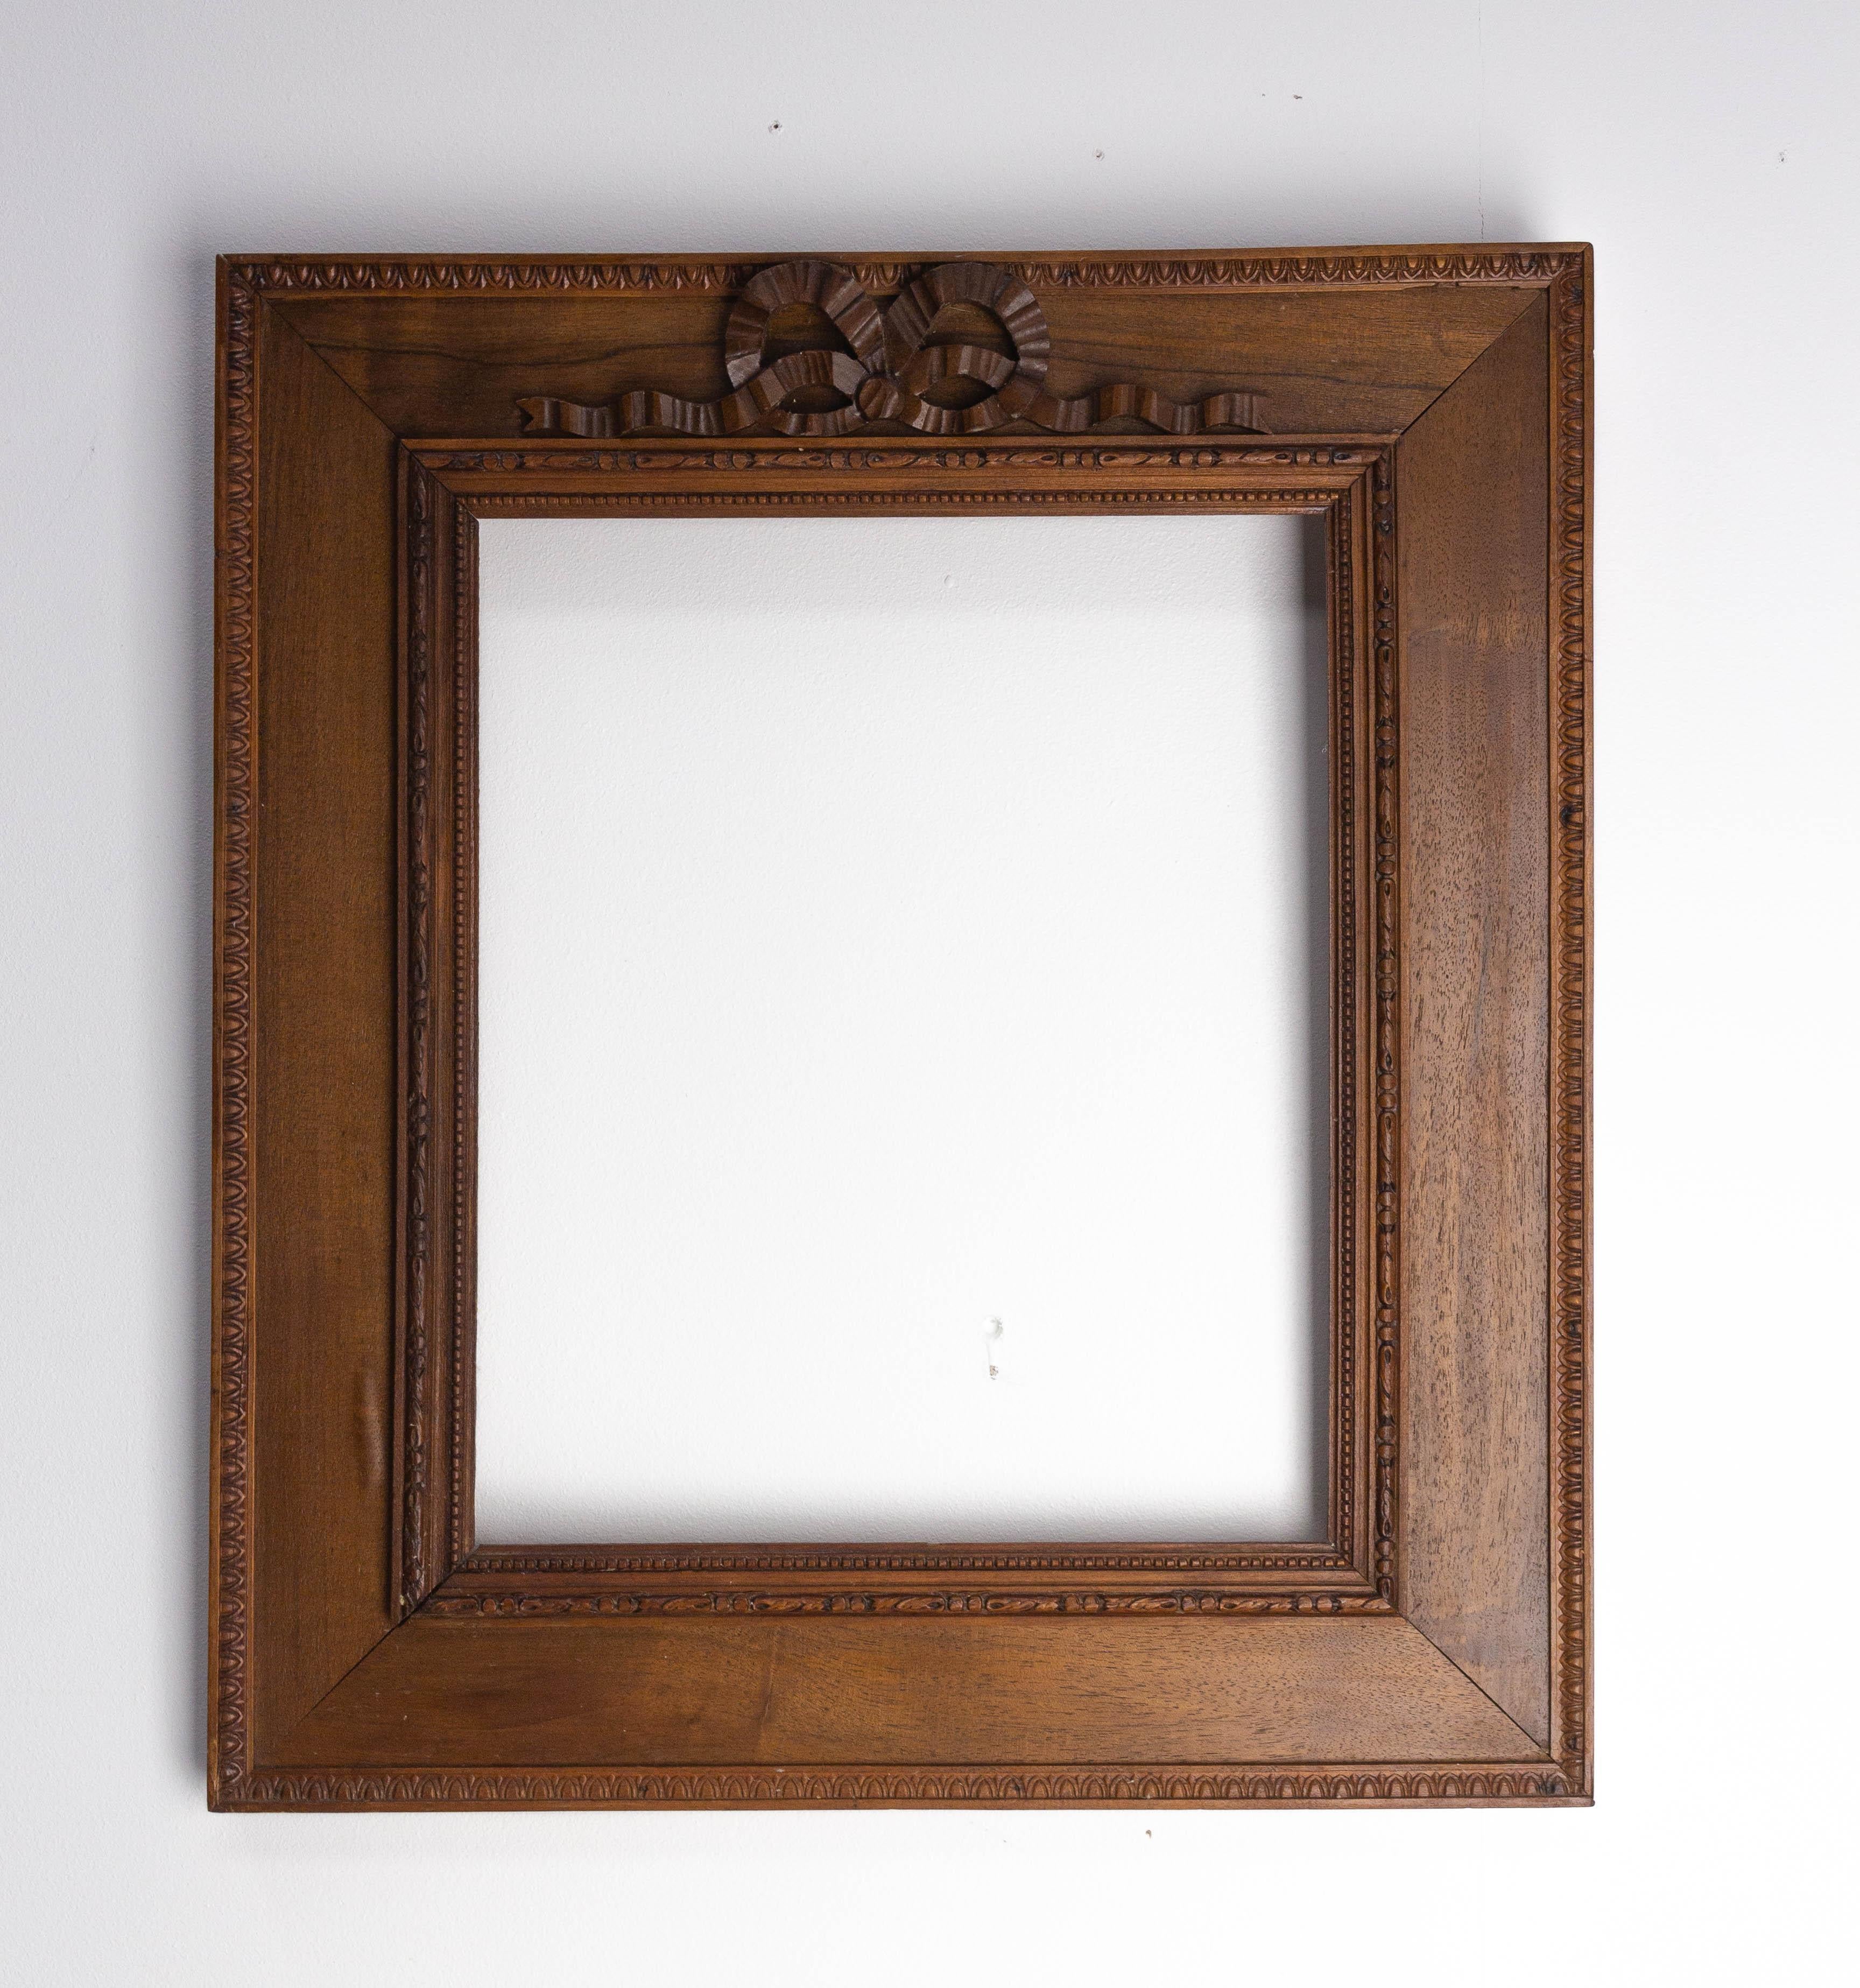 Early 20th century Louis XVI walnut frame, French.
Carved ribbon bow typical of the Louis XVI style, 
the sculptures of the contours of the frame are of remarkable fineness.
Good condition.

Shipping:
L53.5 P4 H60,5 1,4 Kg.